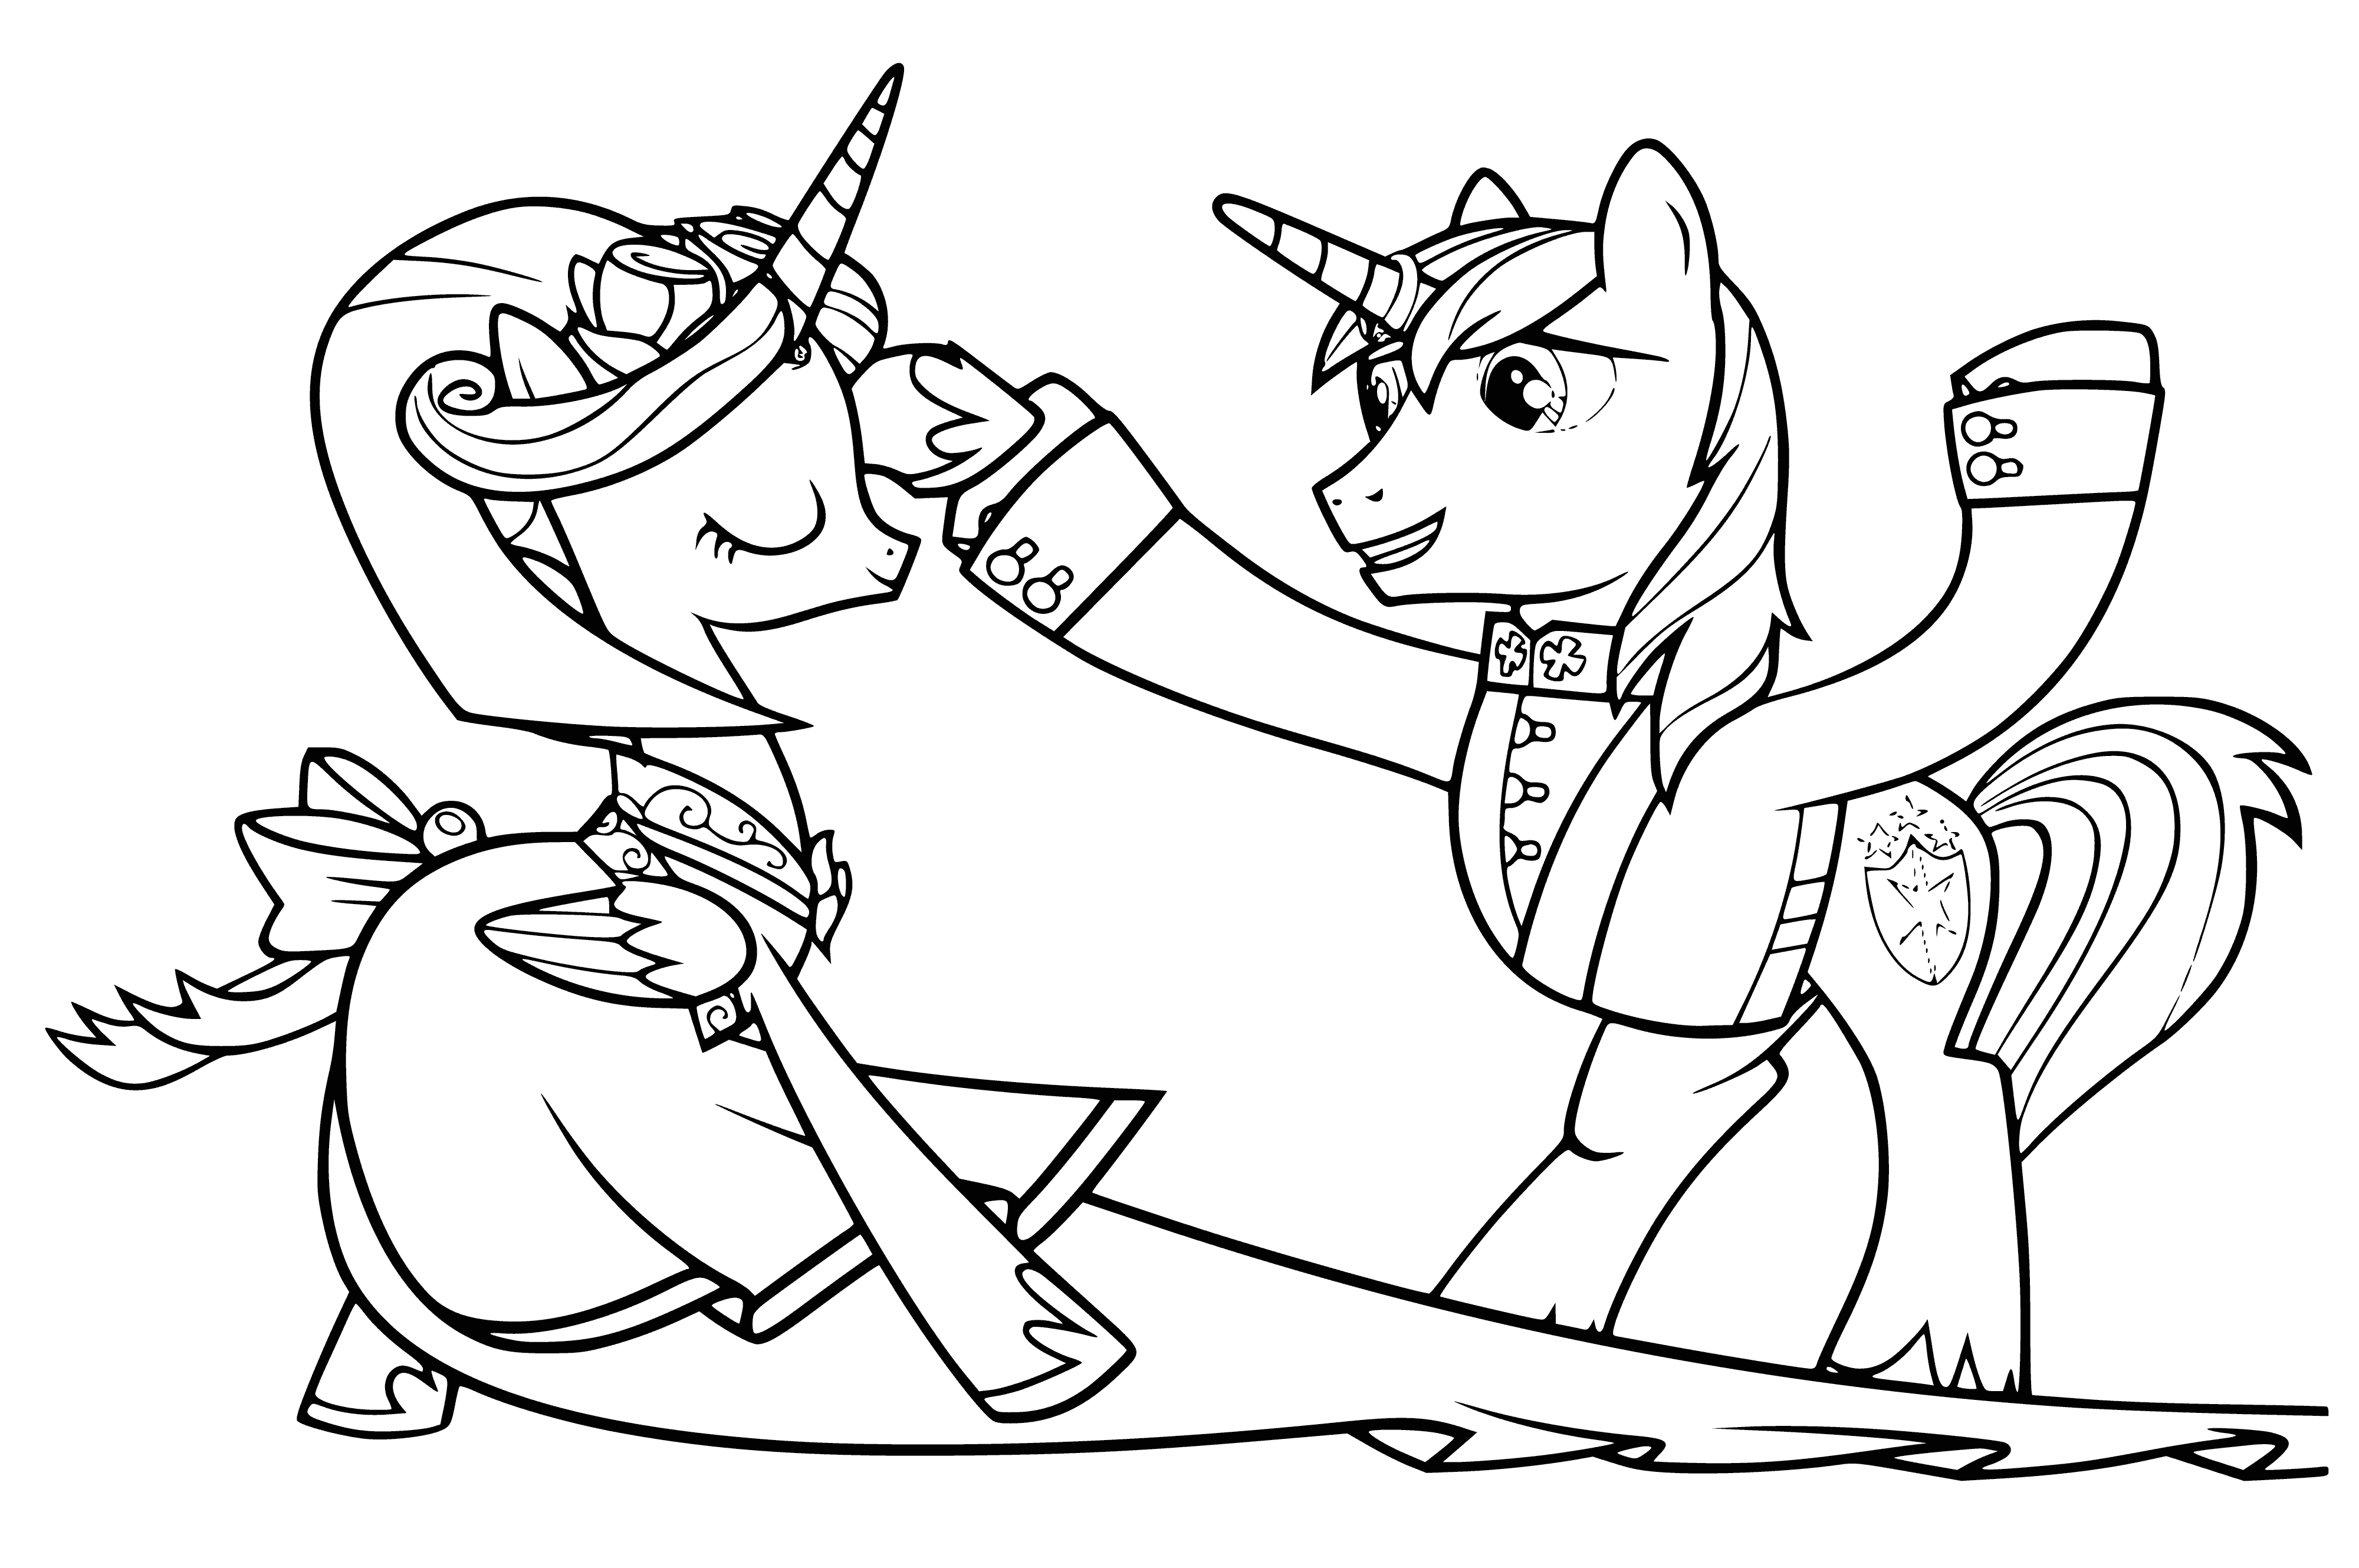 A sweet scene: Princess Cadence & Shining Armor in stunning garb, lovingly looking into each other's eyes.